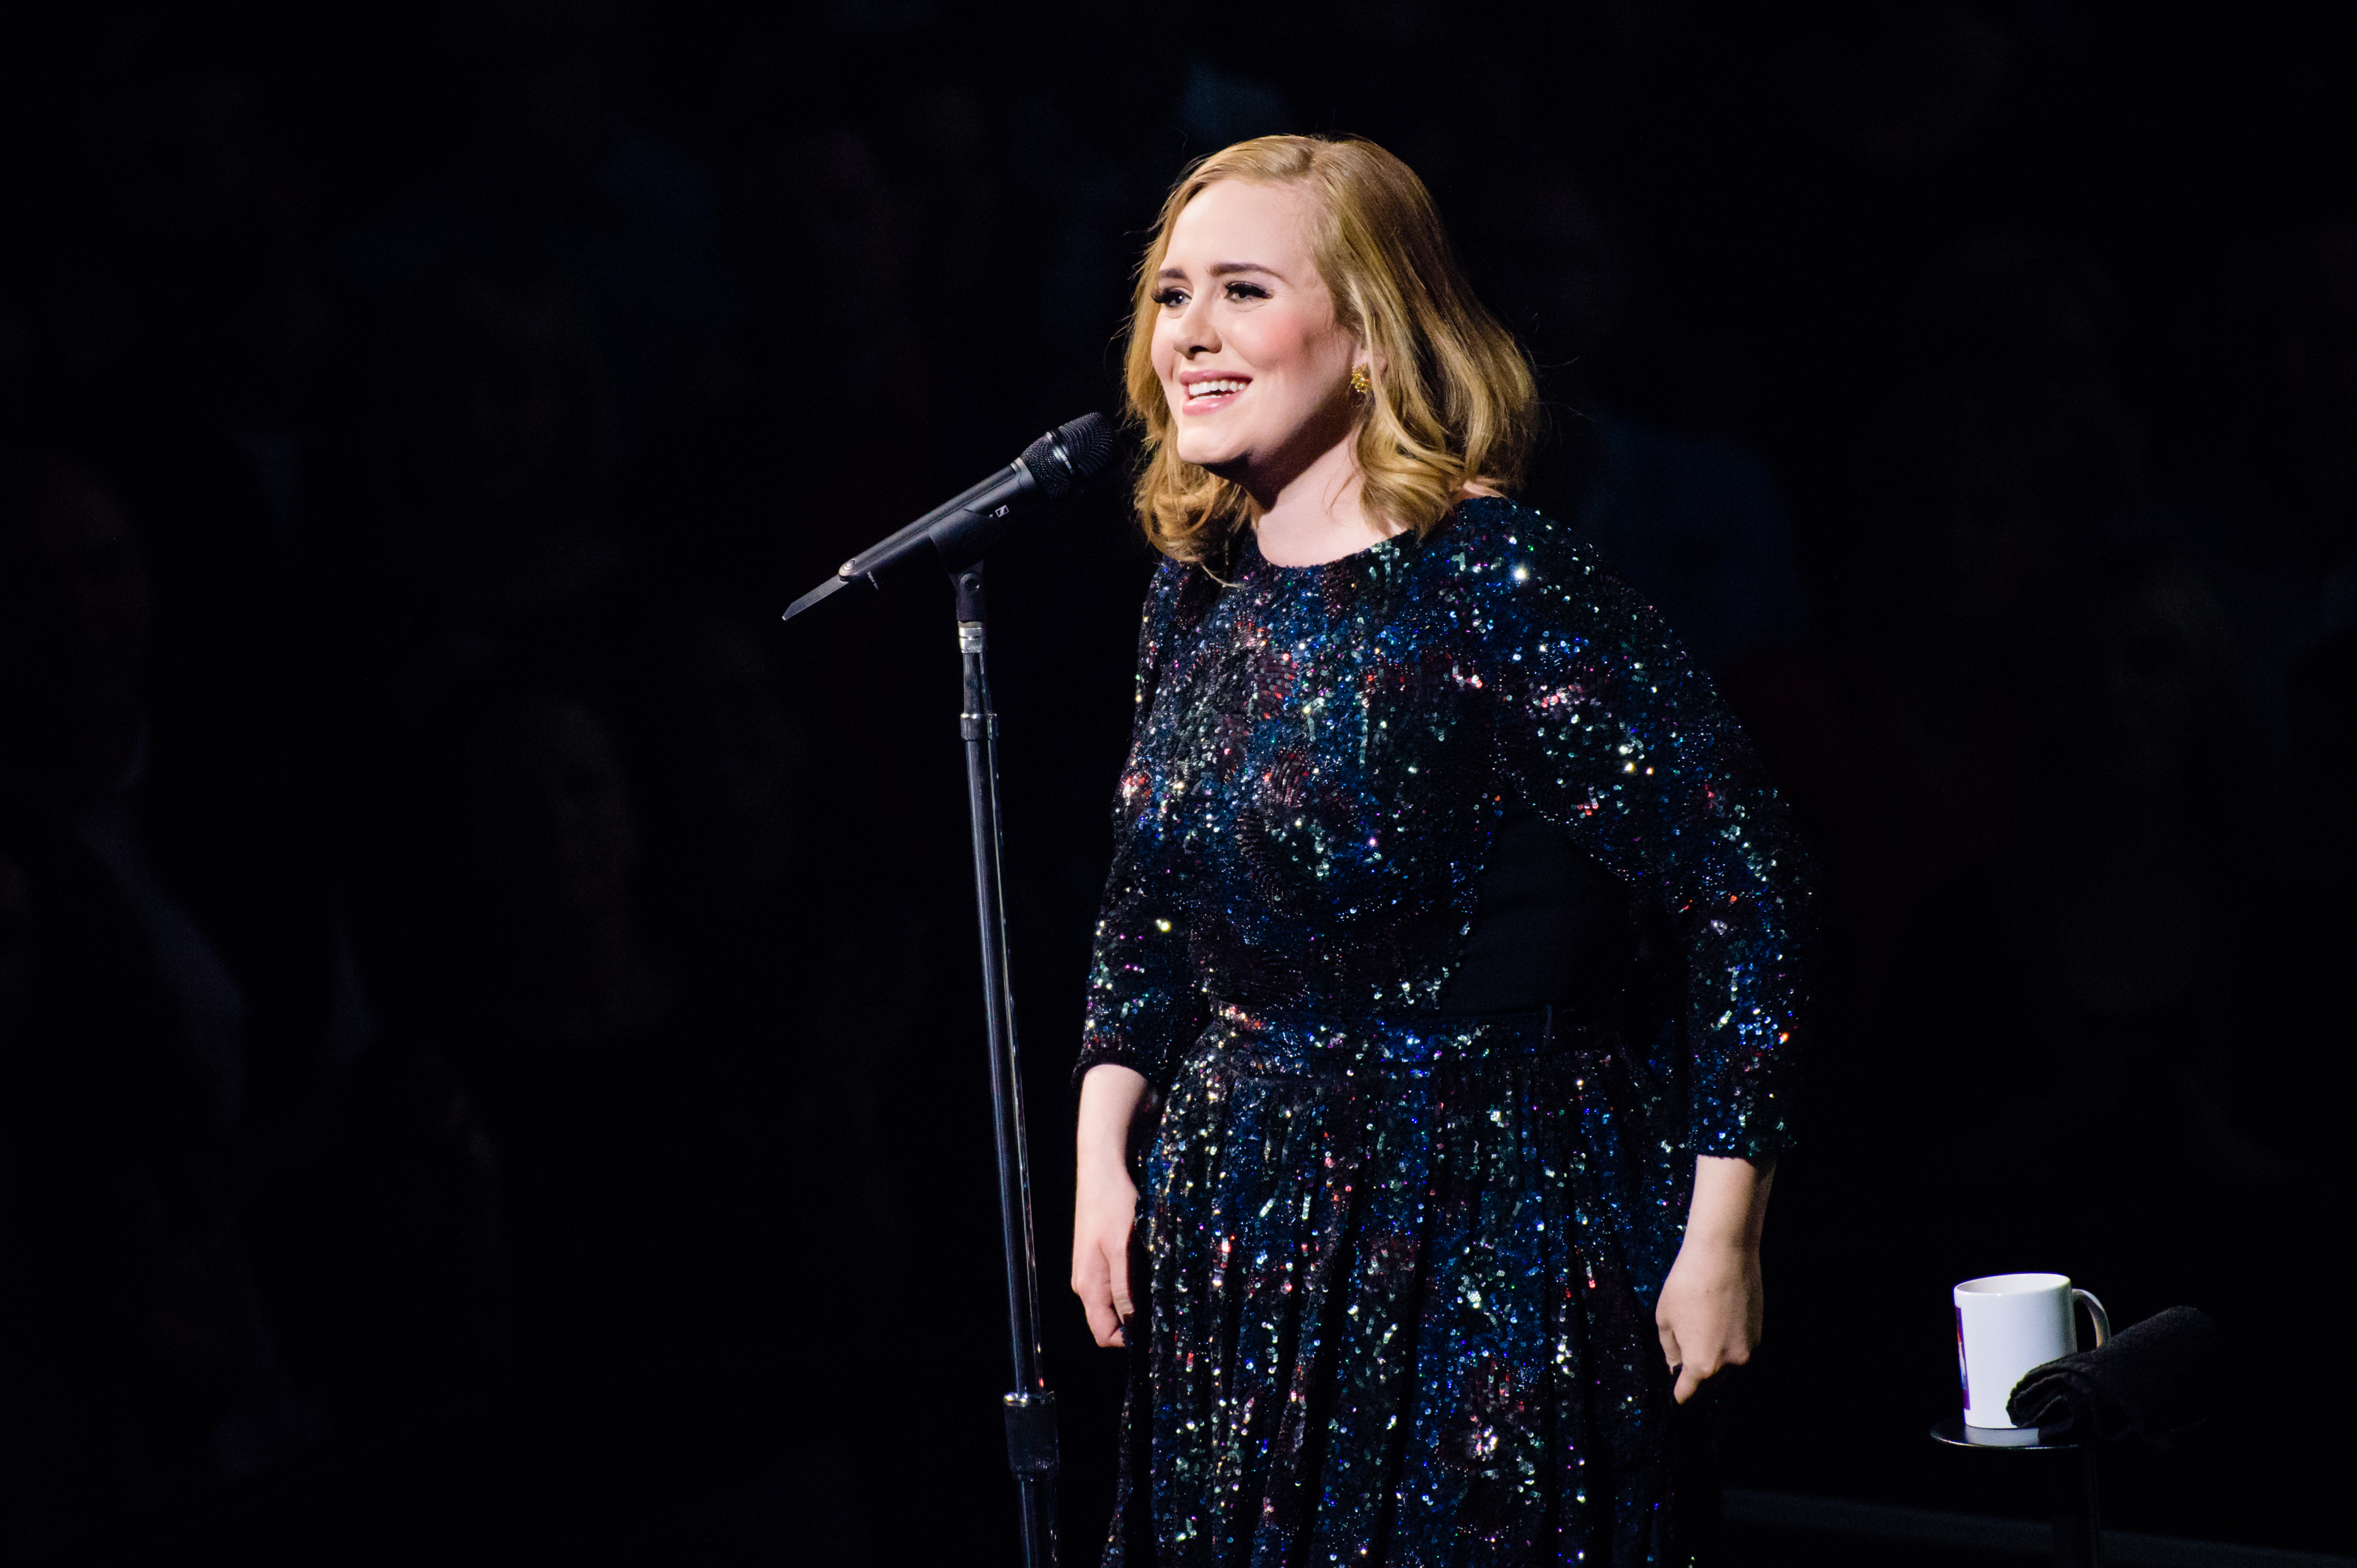 Singer Adele performs live on stage during a concert at Mercedes-Benz Arena on May 07, 2016 in Berlin, Germany. (Stefan Hoederath&mdash;September Manag/Getty Images)